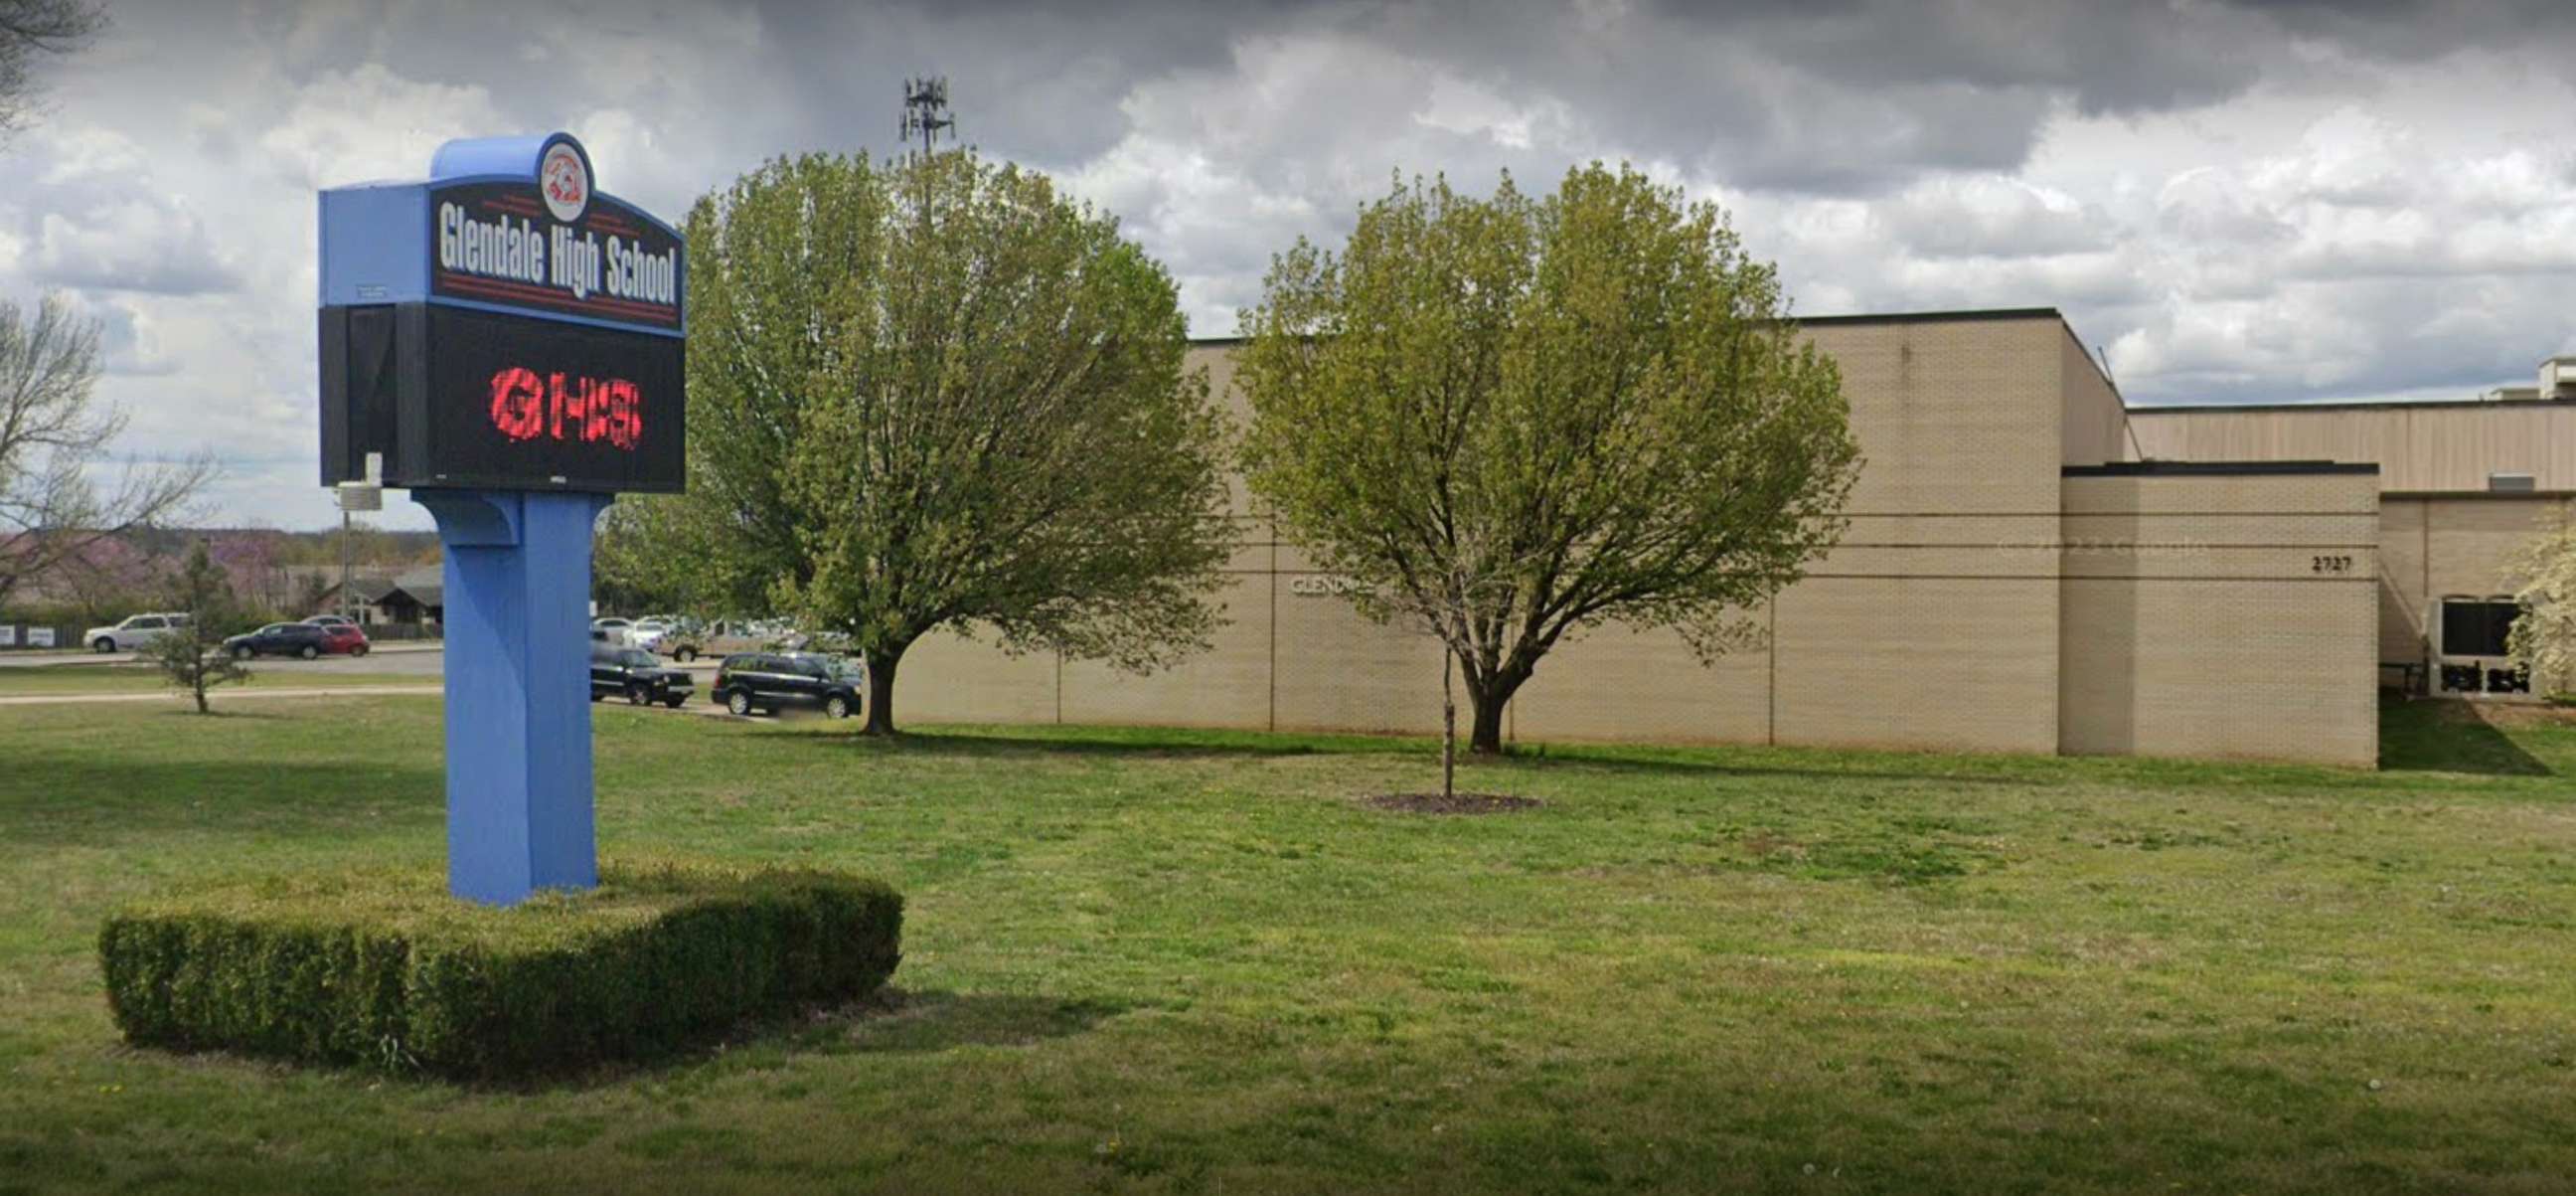 PHOTO: Glendale High School in Springfield, Mo. is shown in this Google Maps Street View image.